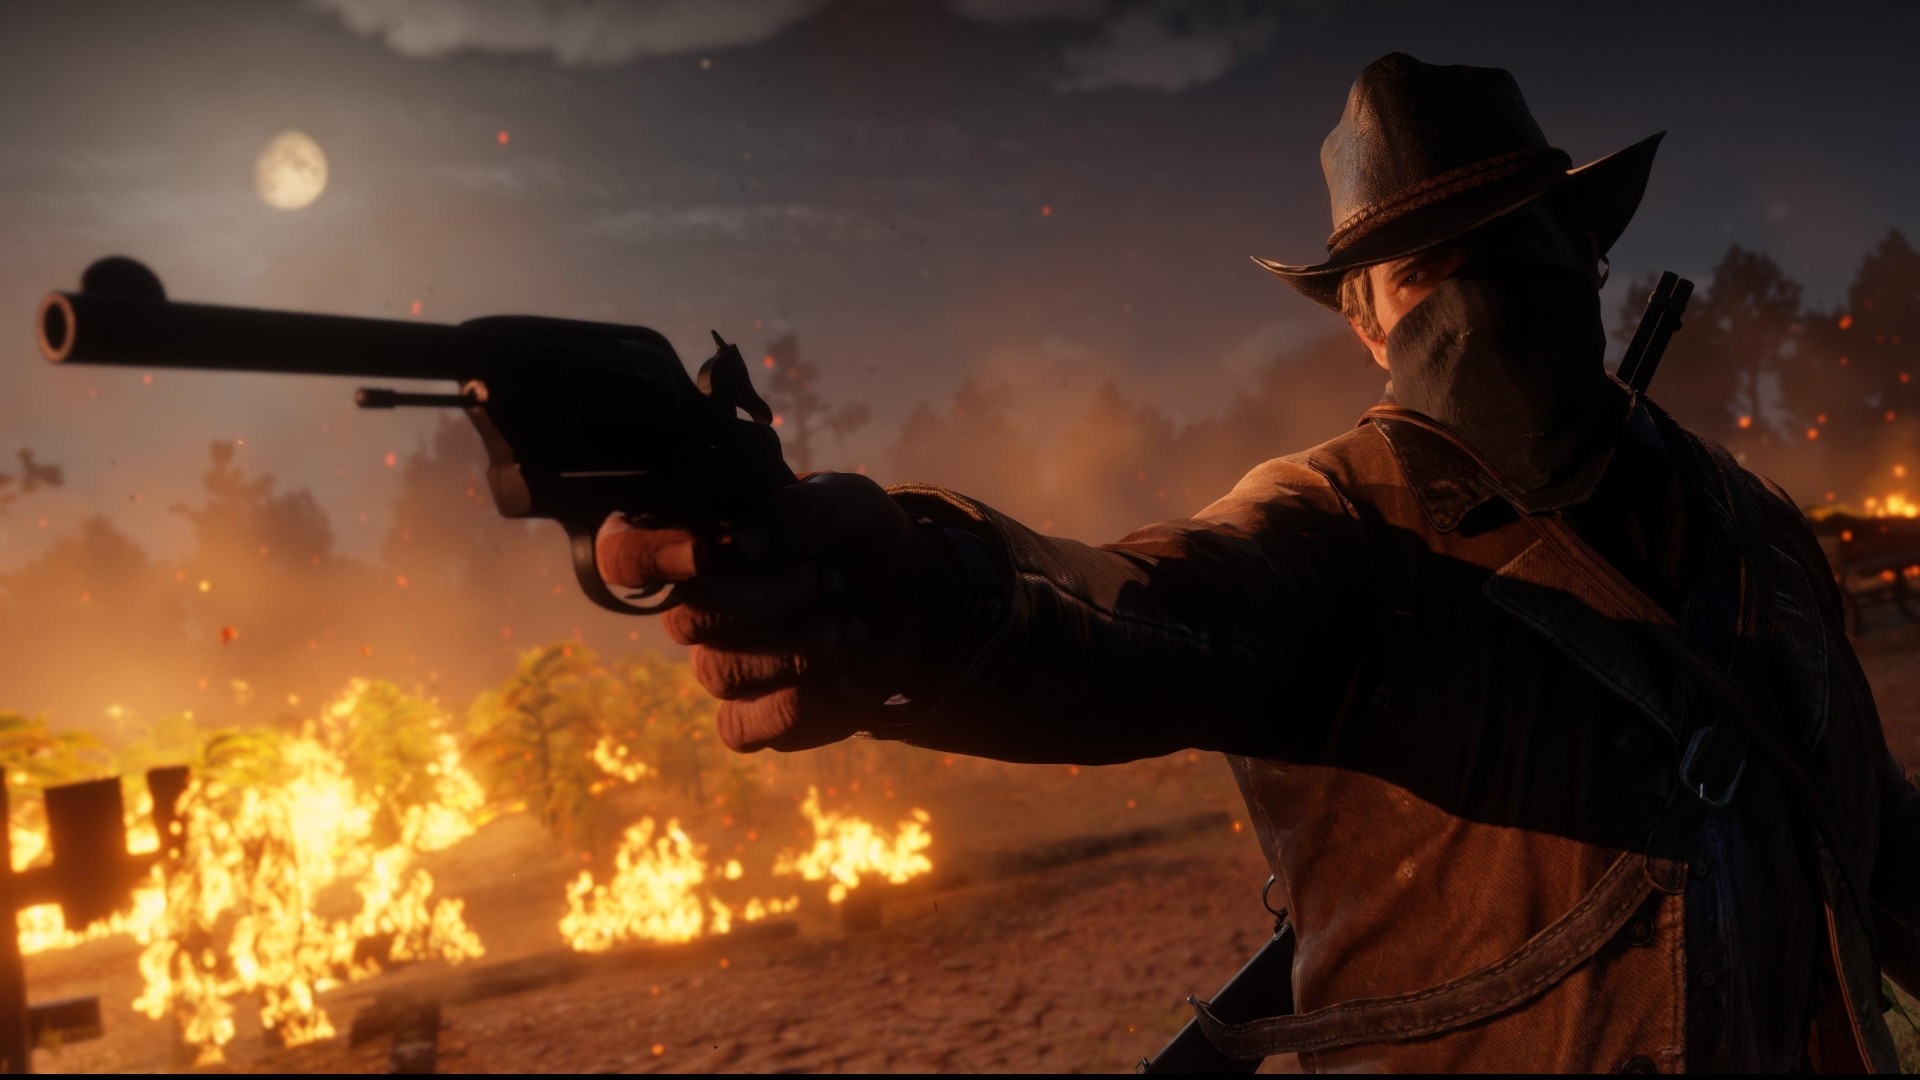 Rockstar games launcher red dead redemption. Ред дед редемпшен 2. Red Dead Redemption 2 shop. Игра ред дед редемпшн. Red Dead Redemption 2 (PC).